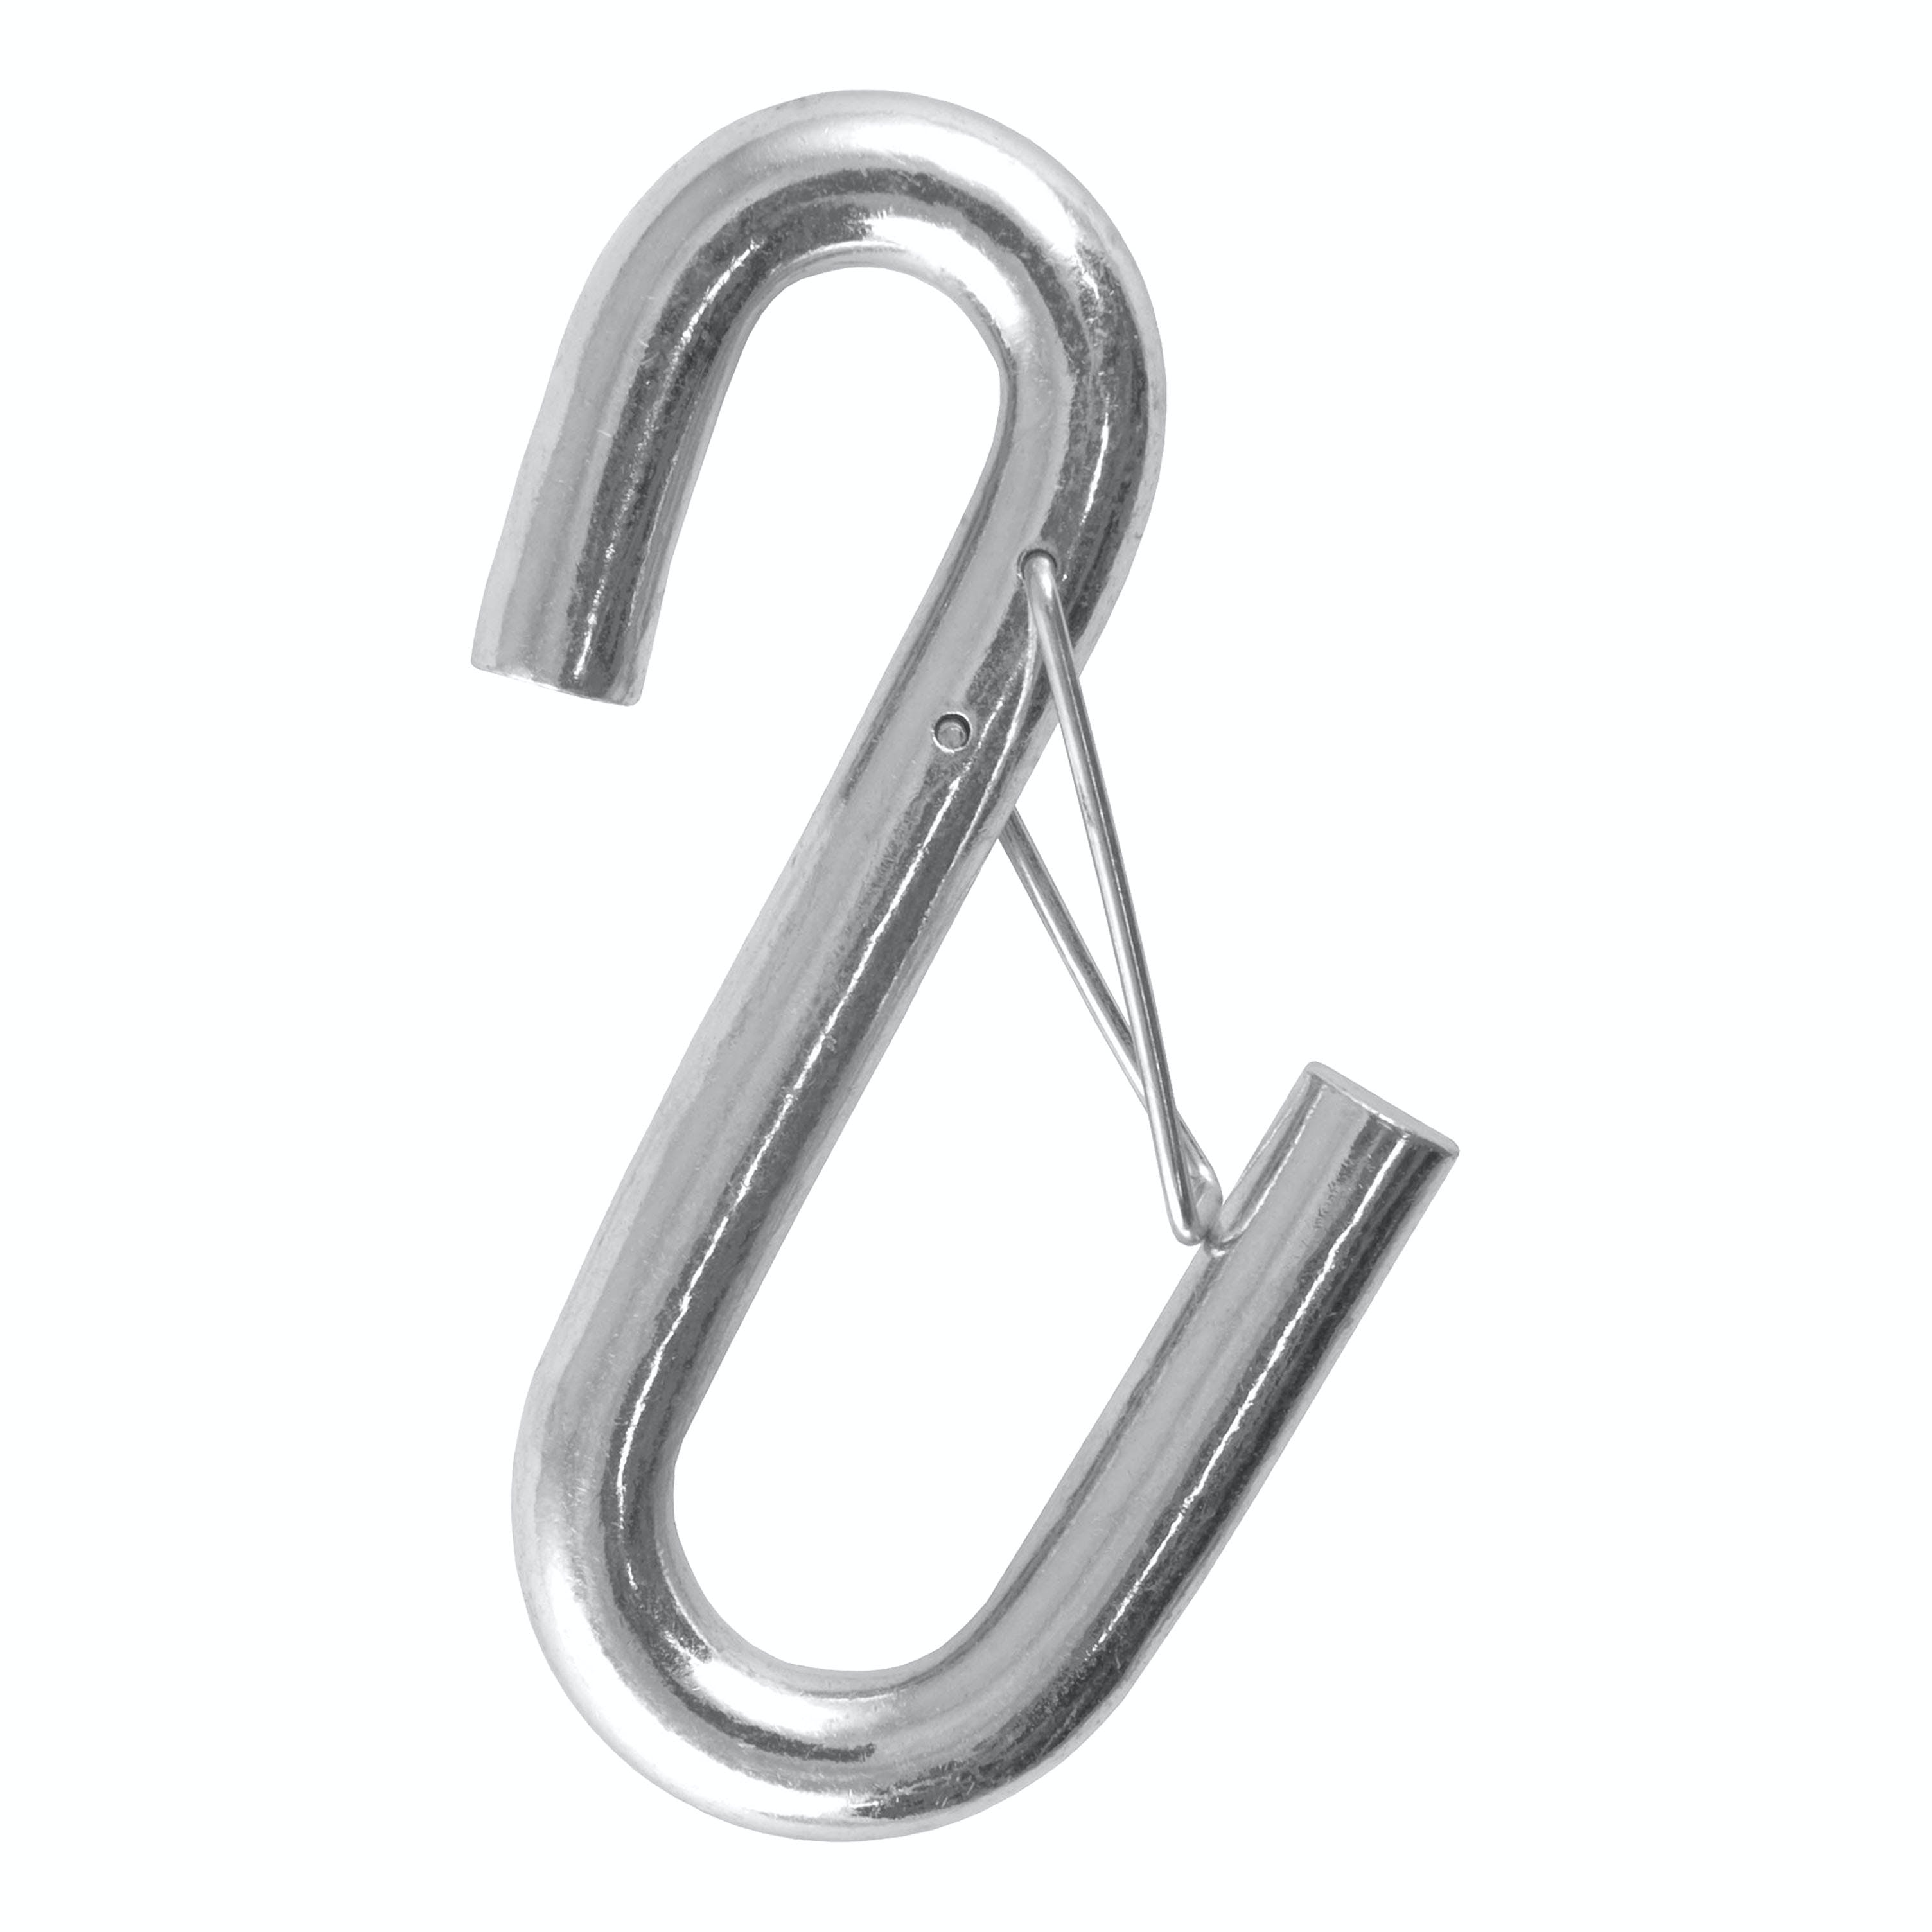 CURT 81840 Certified 13/32 Safety Latch S-Hook (3,500 lbs.)